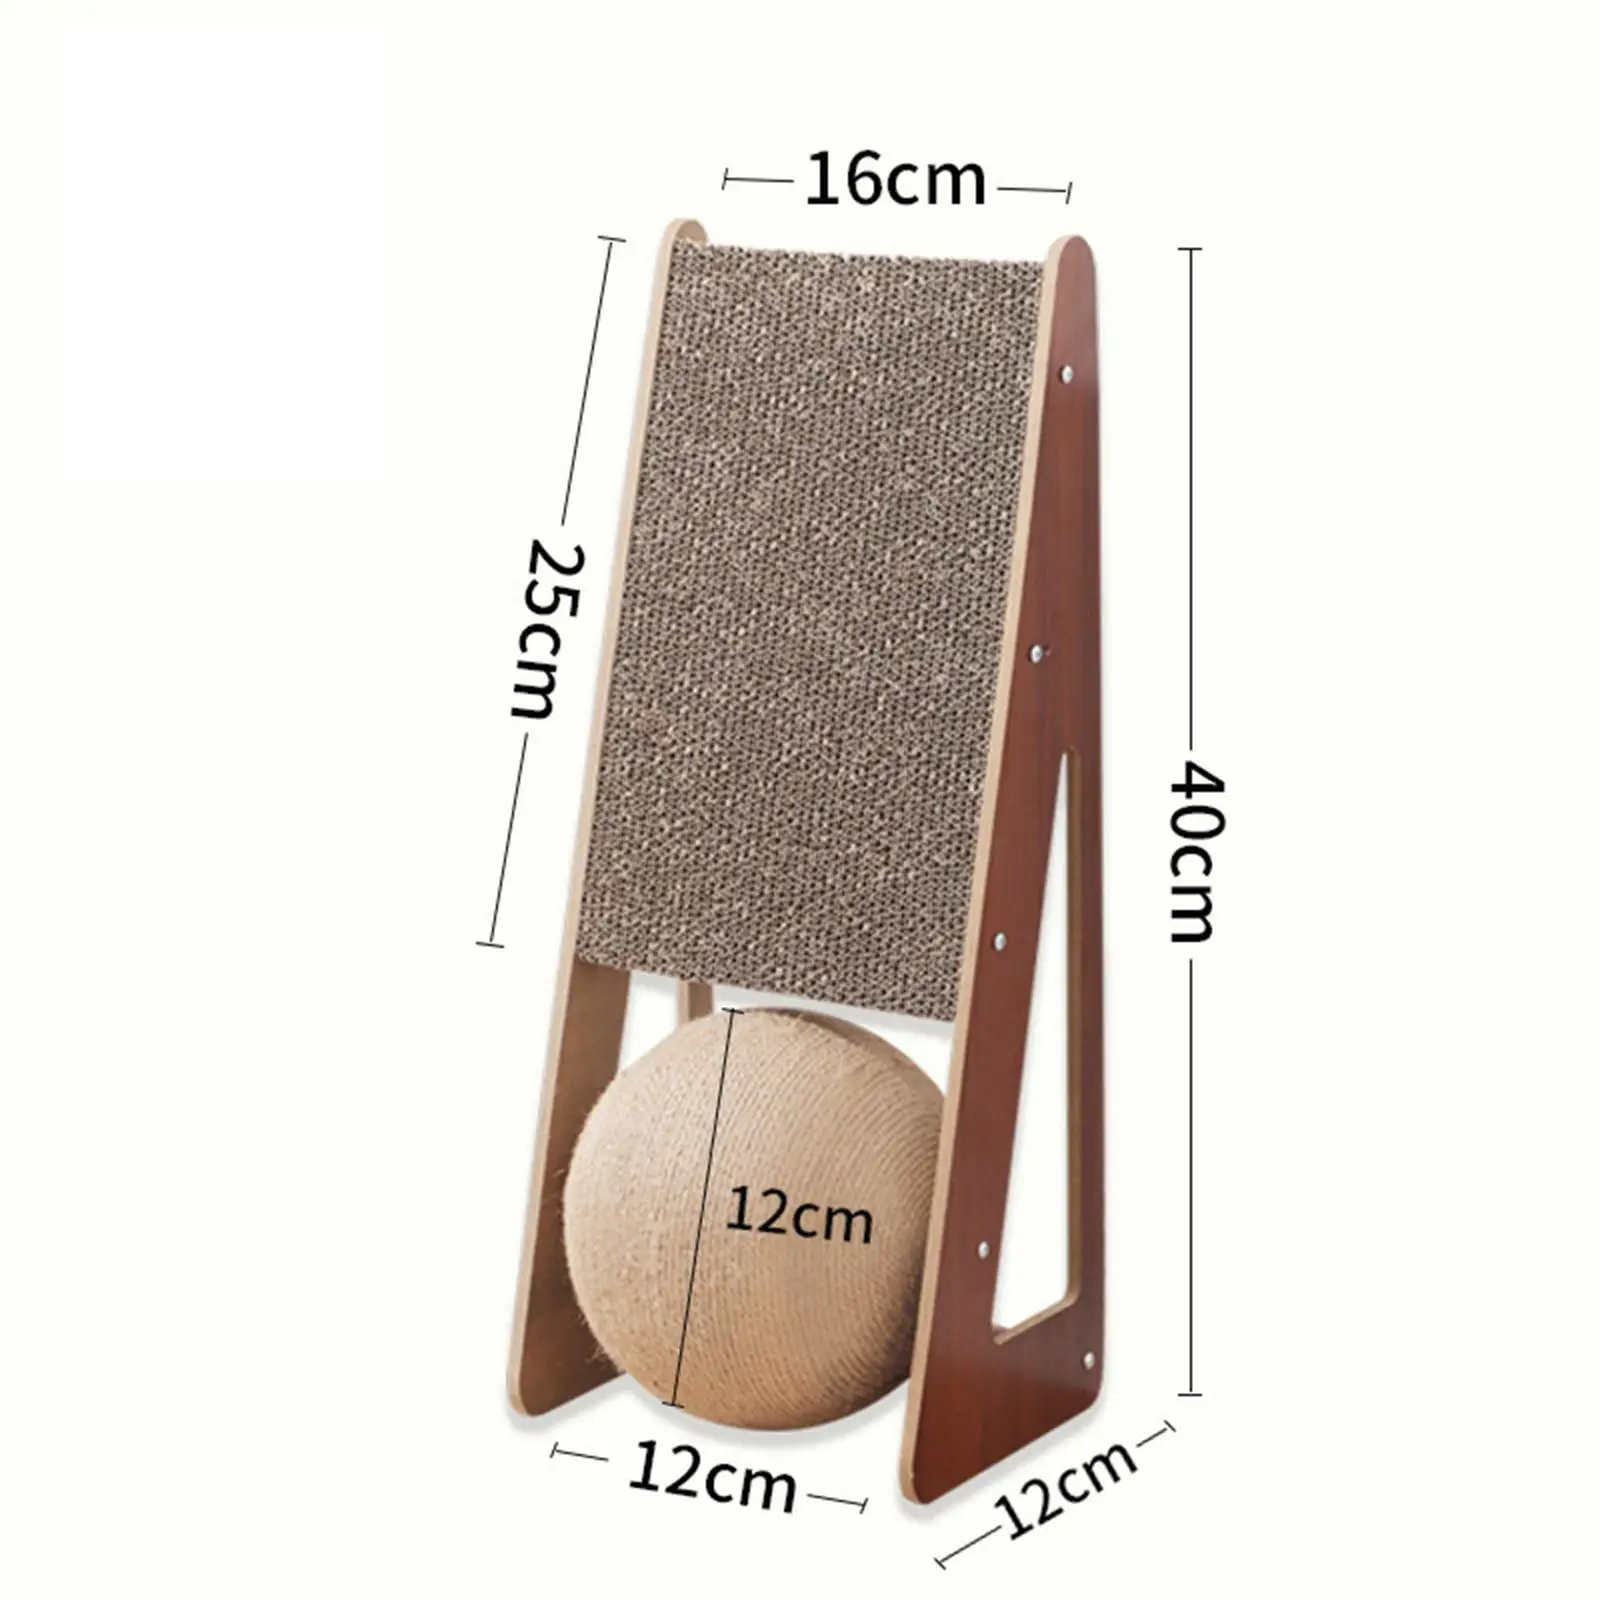 Standing Scratcher Pad Cat Scratcher Home Decor Activity Toy Corrugated Cardboard for Protector Living Room Indoor